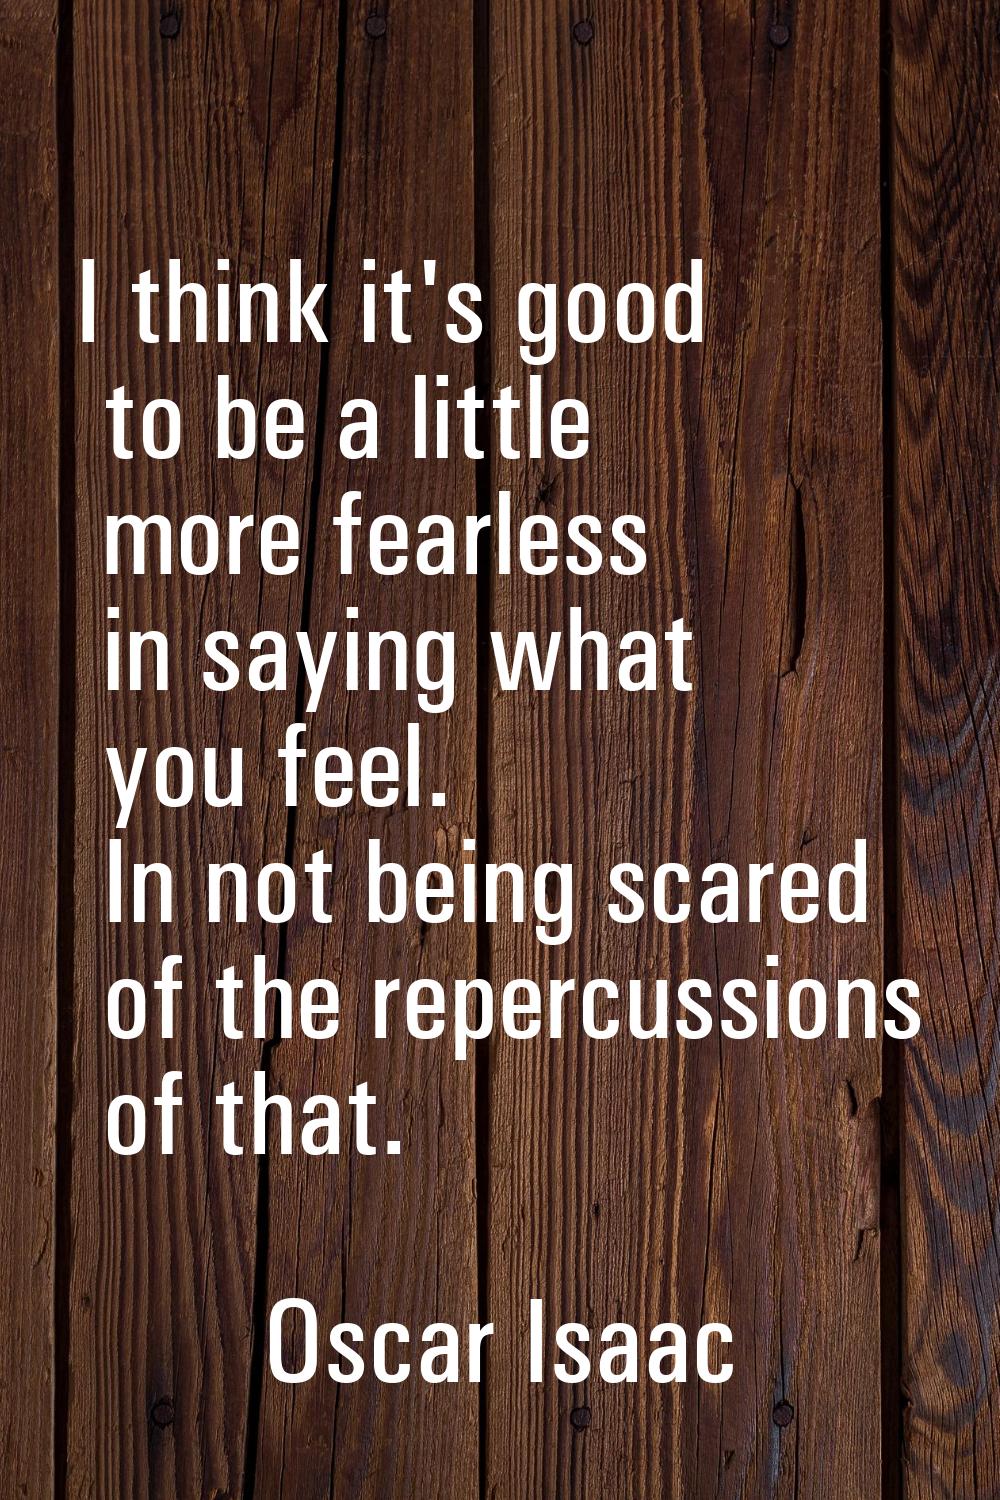 I think it's good to be a little more fearless in saying what you feel. In not being scared of the 